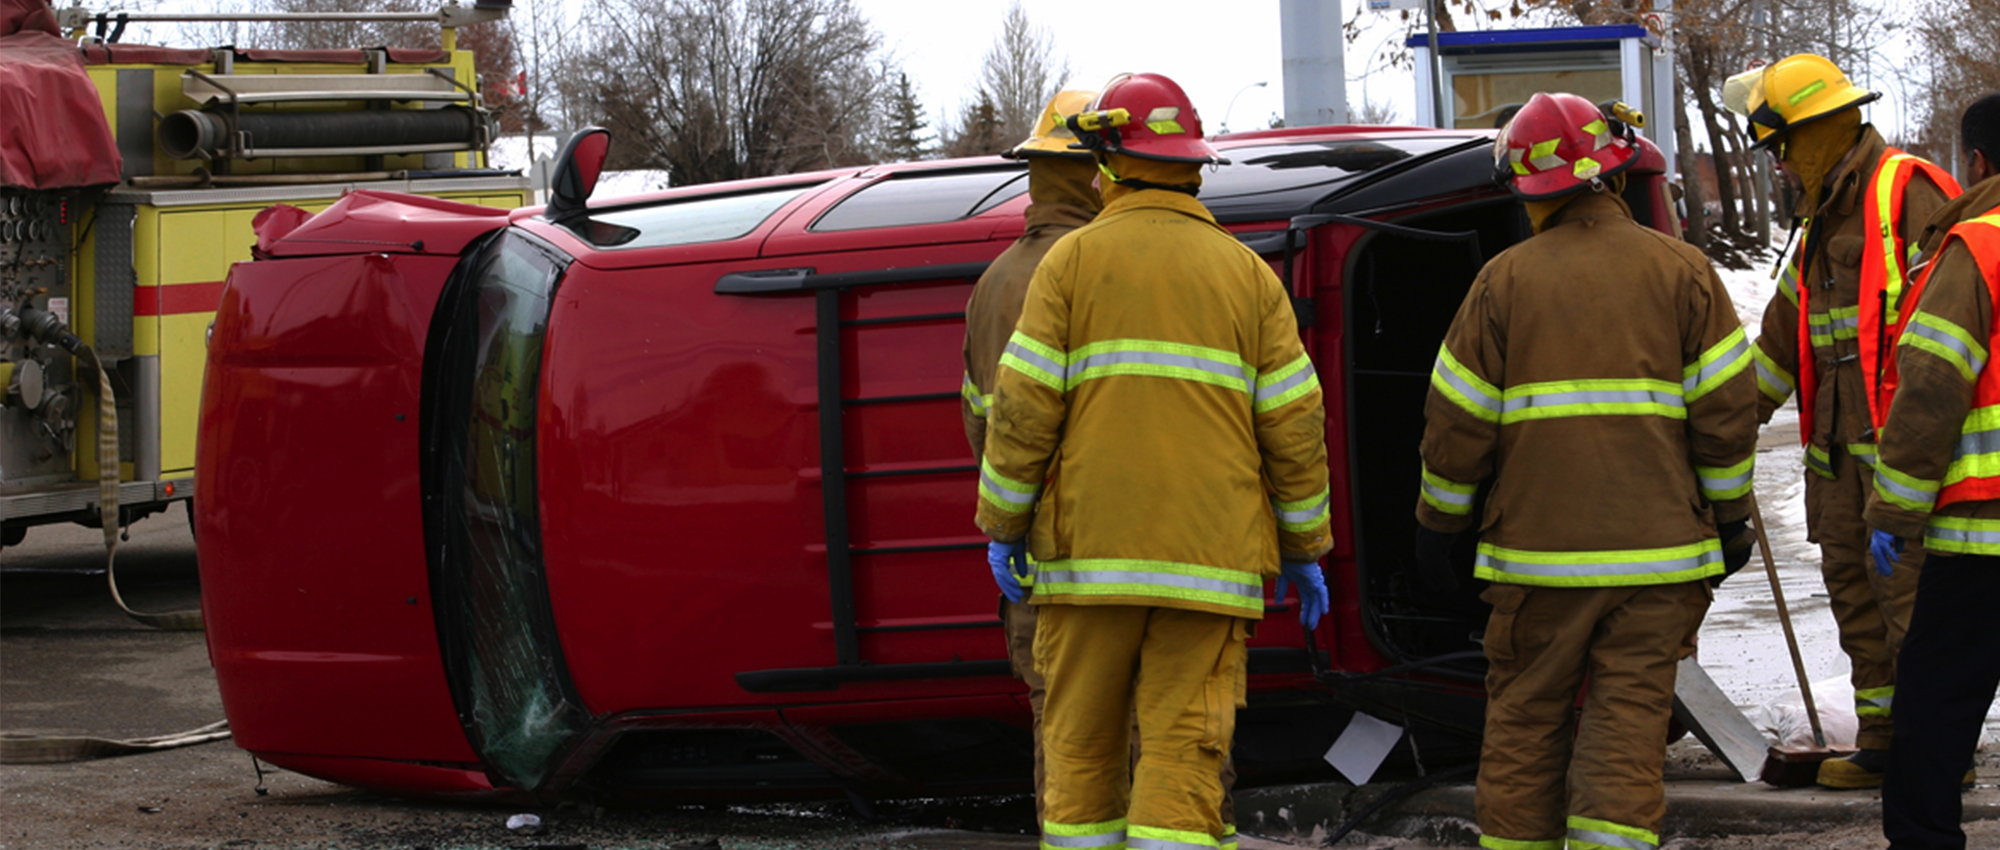 Paramedics help next to a SUV lying on its side after a rollover accident.